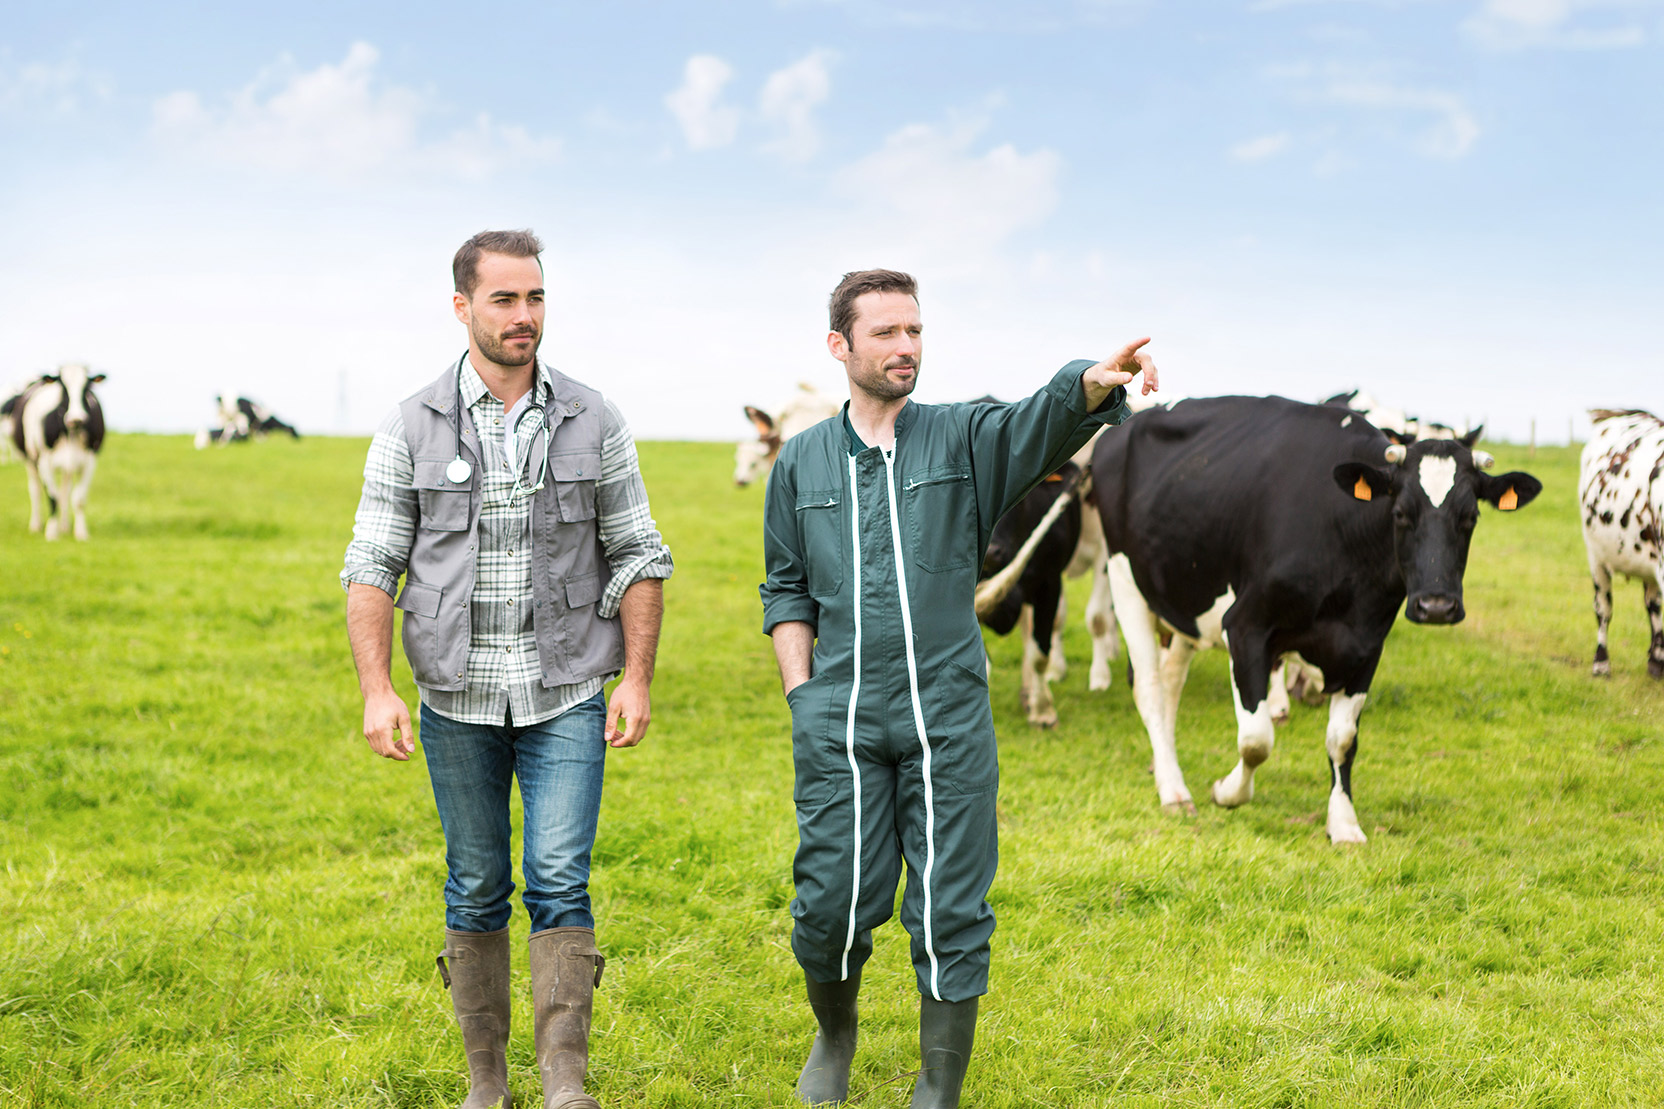 A veterinarian and a farmer walking in a field with cows behind them